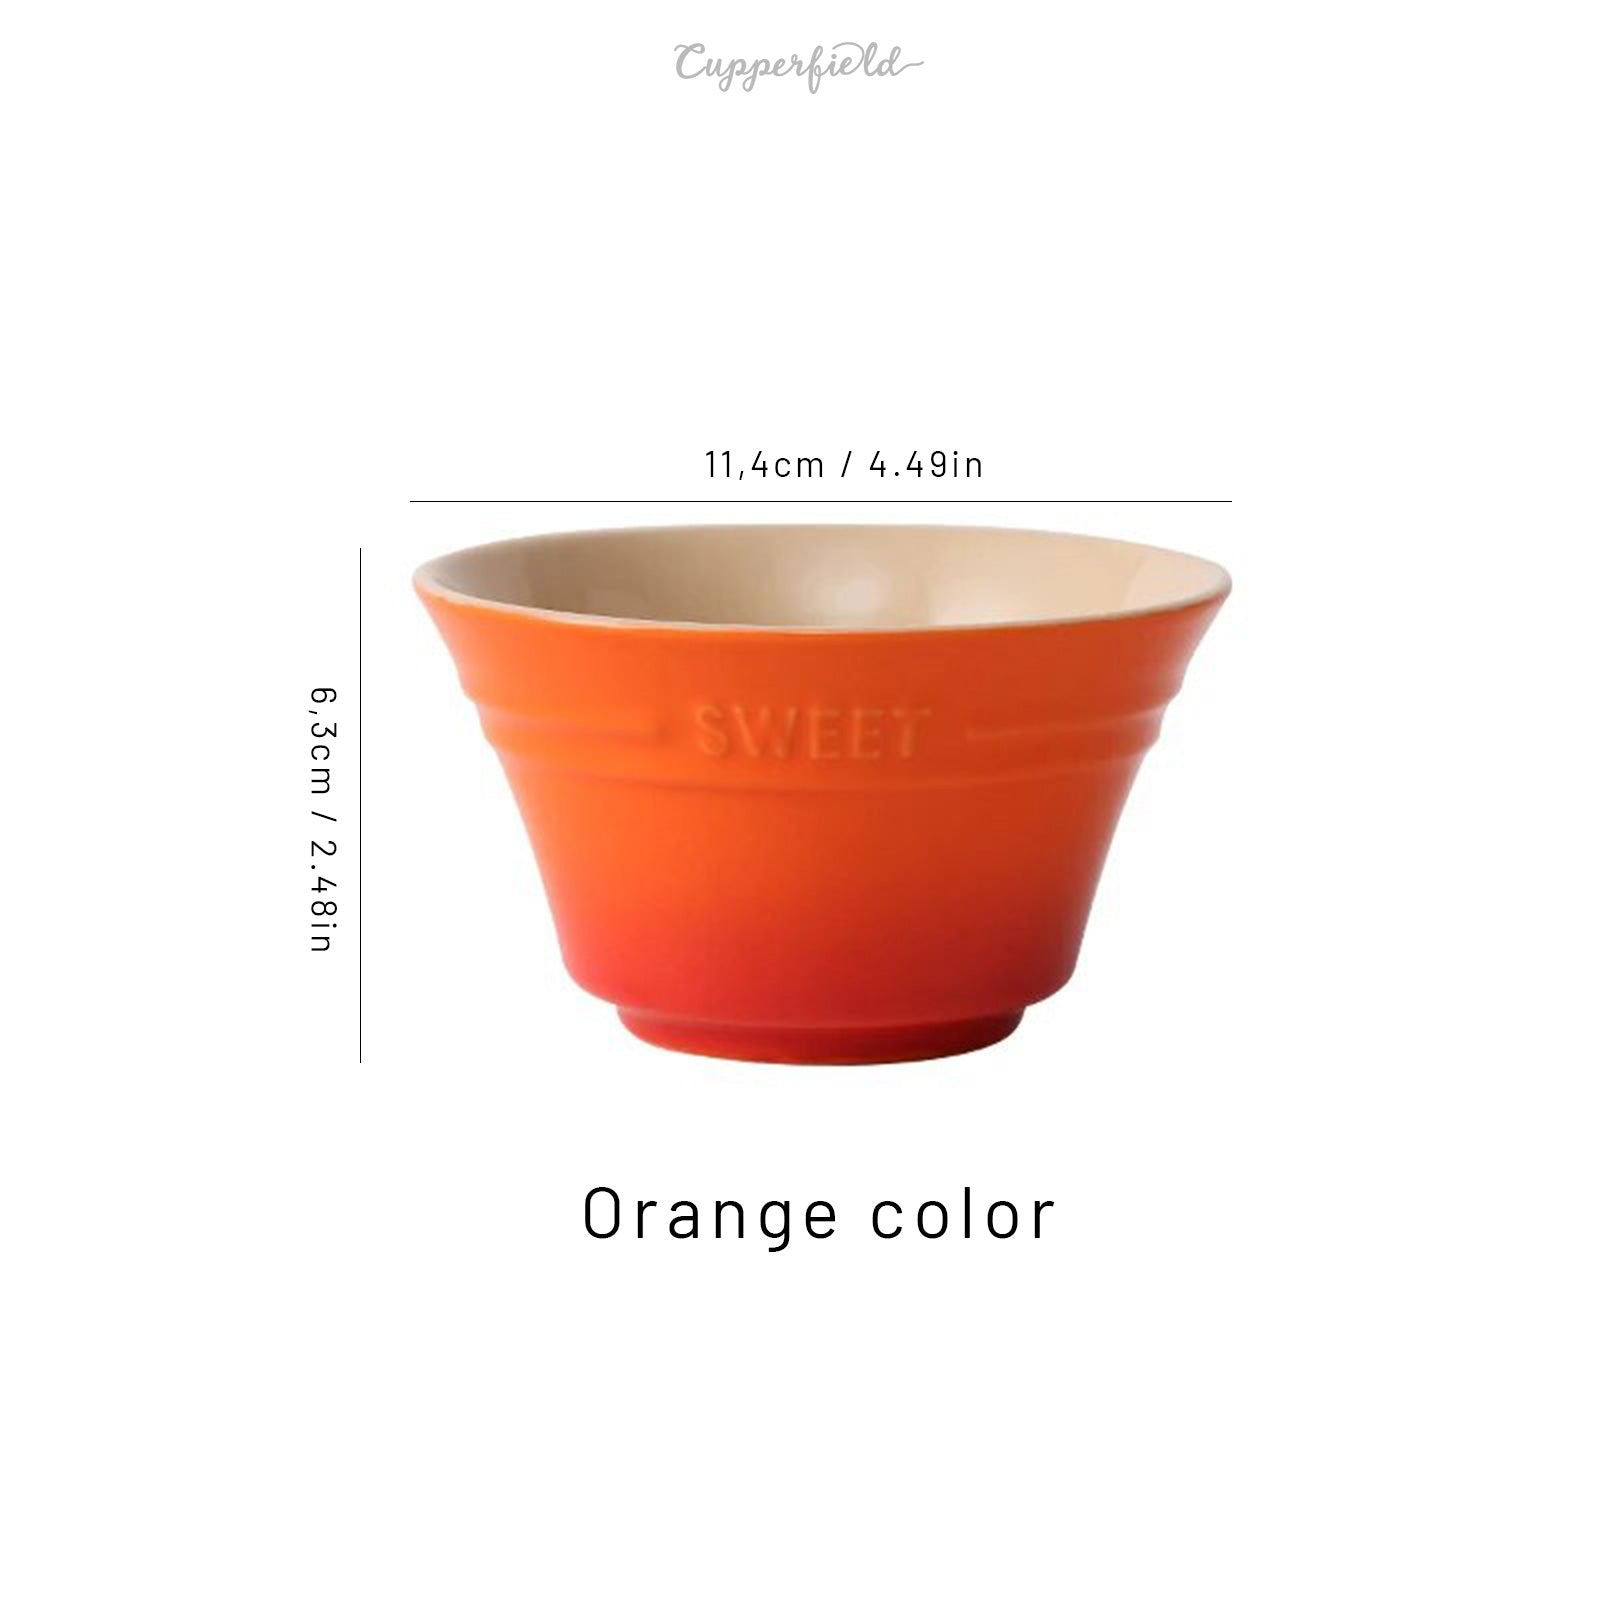 Pot-Shaped Retro Bowls in Eight Vibrant Colors